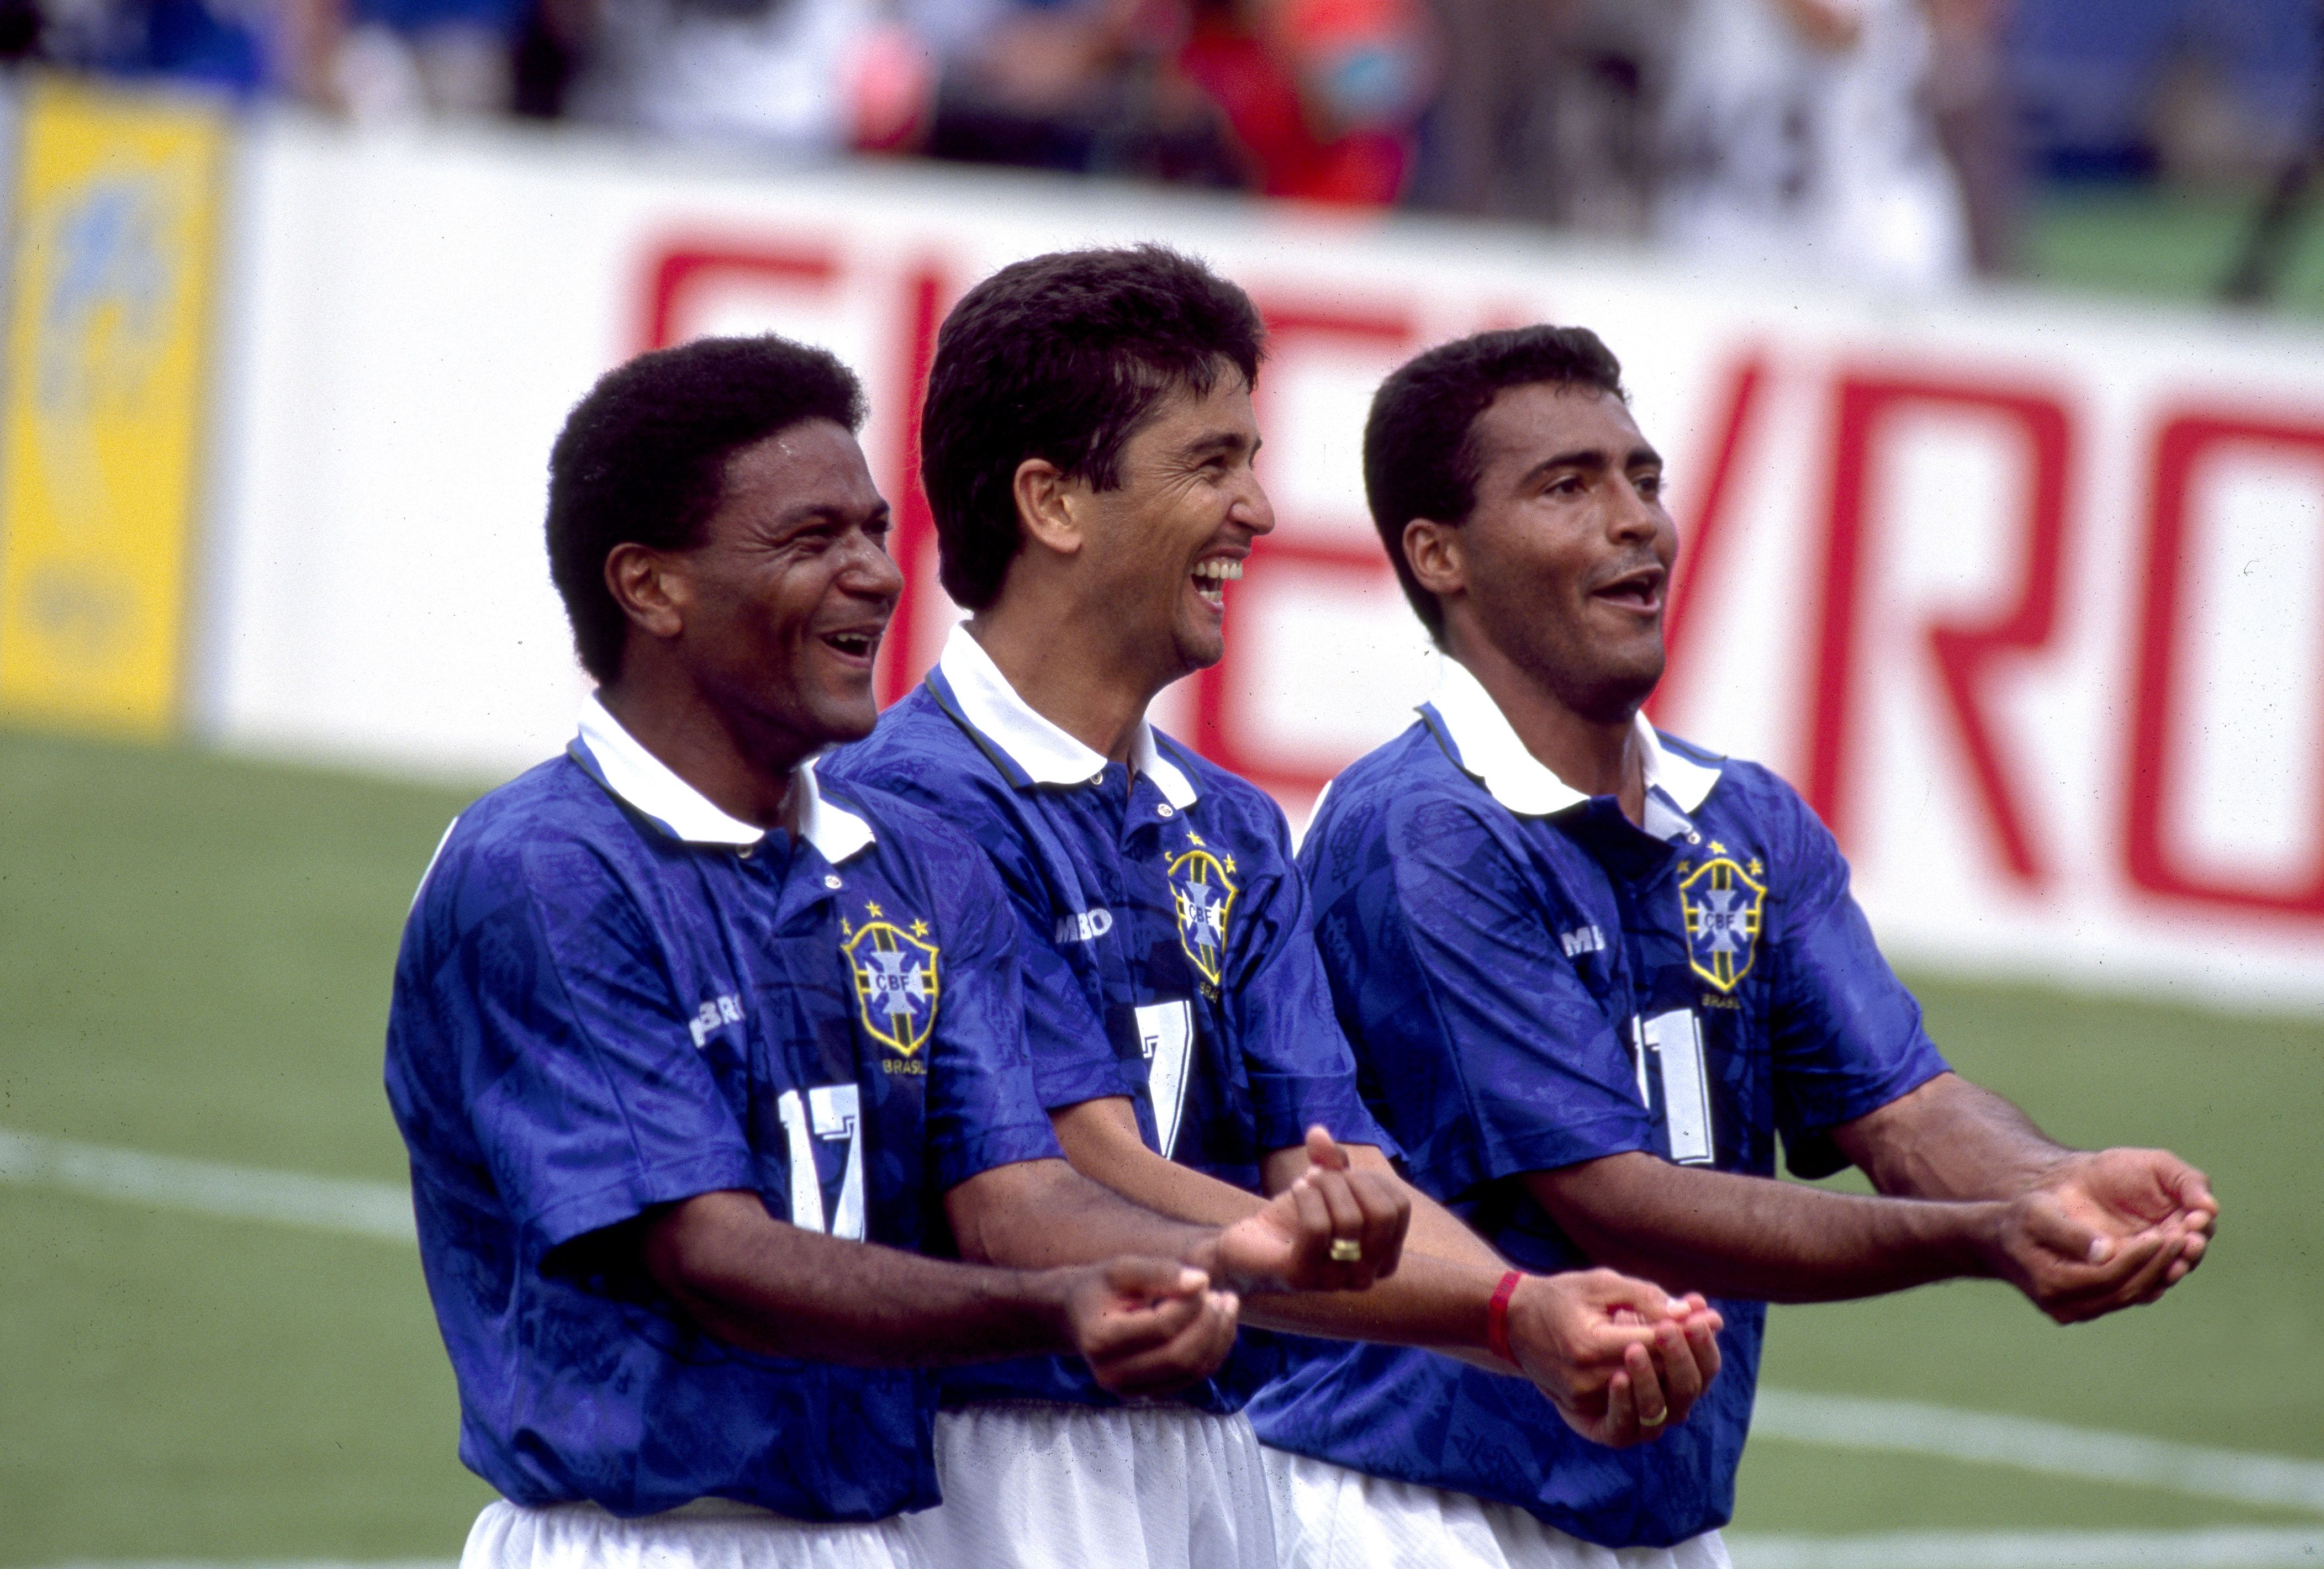 Three soccer players celebrating a goal